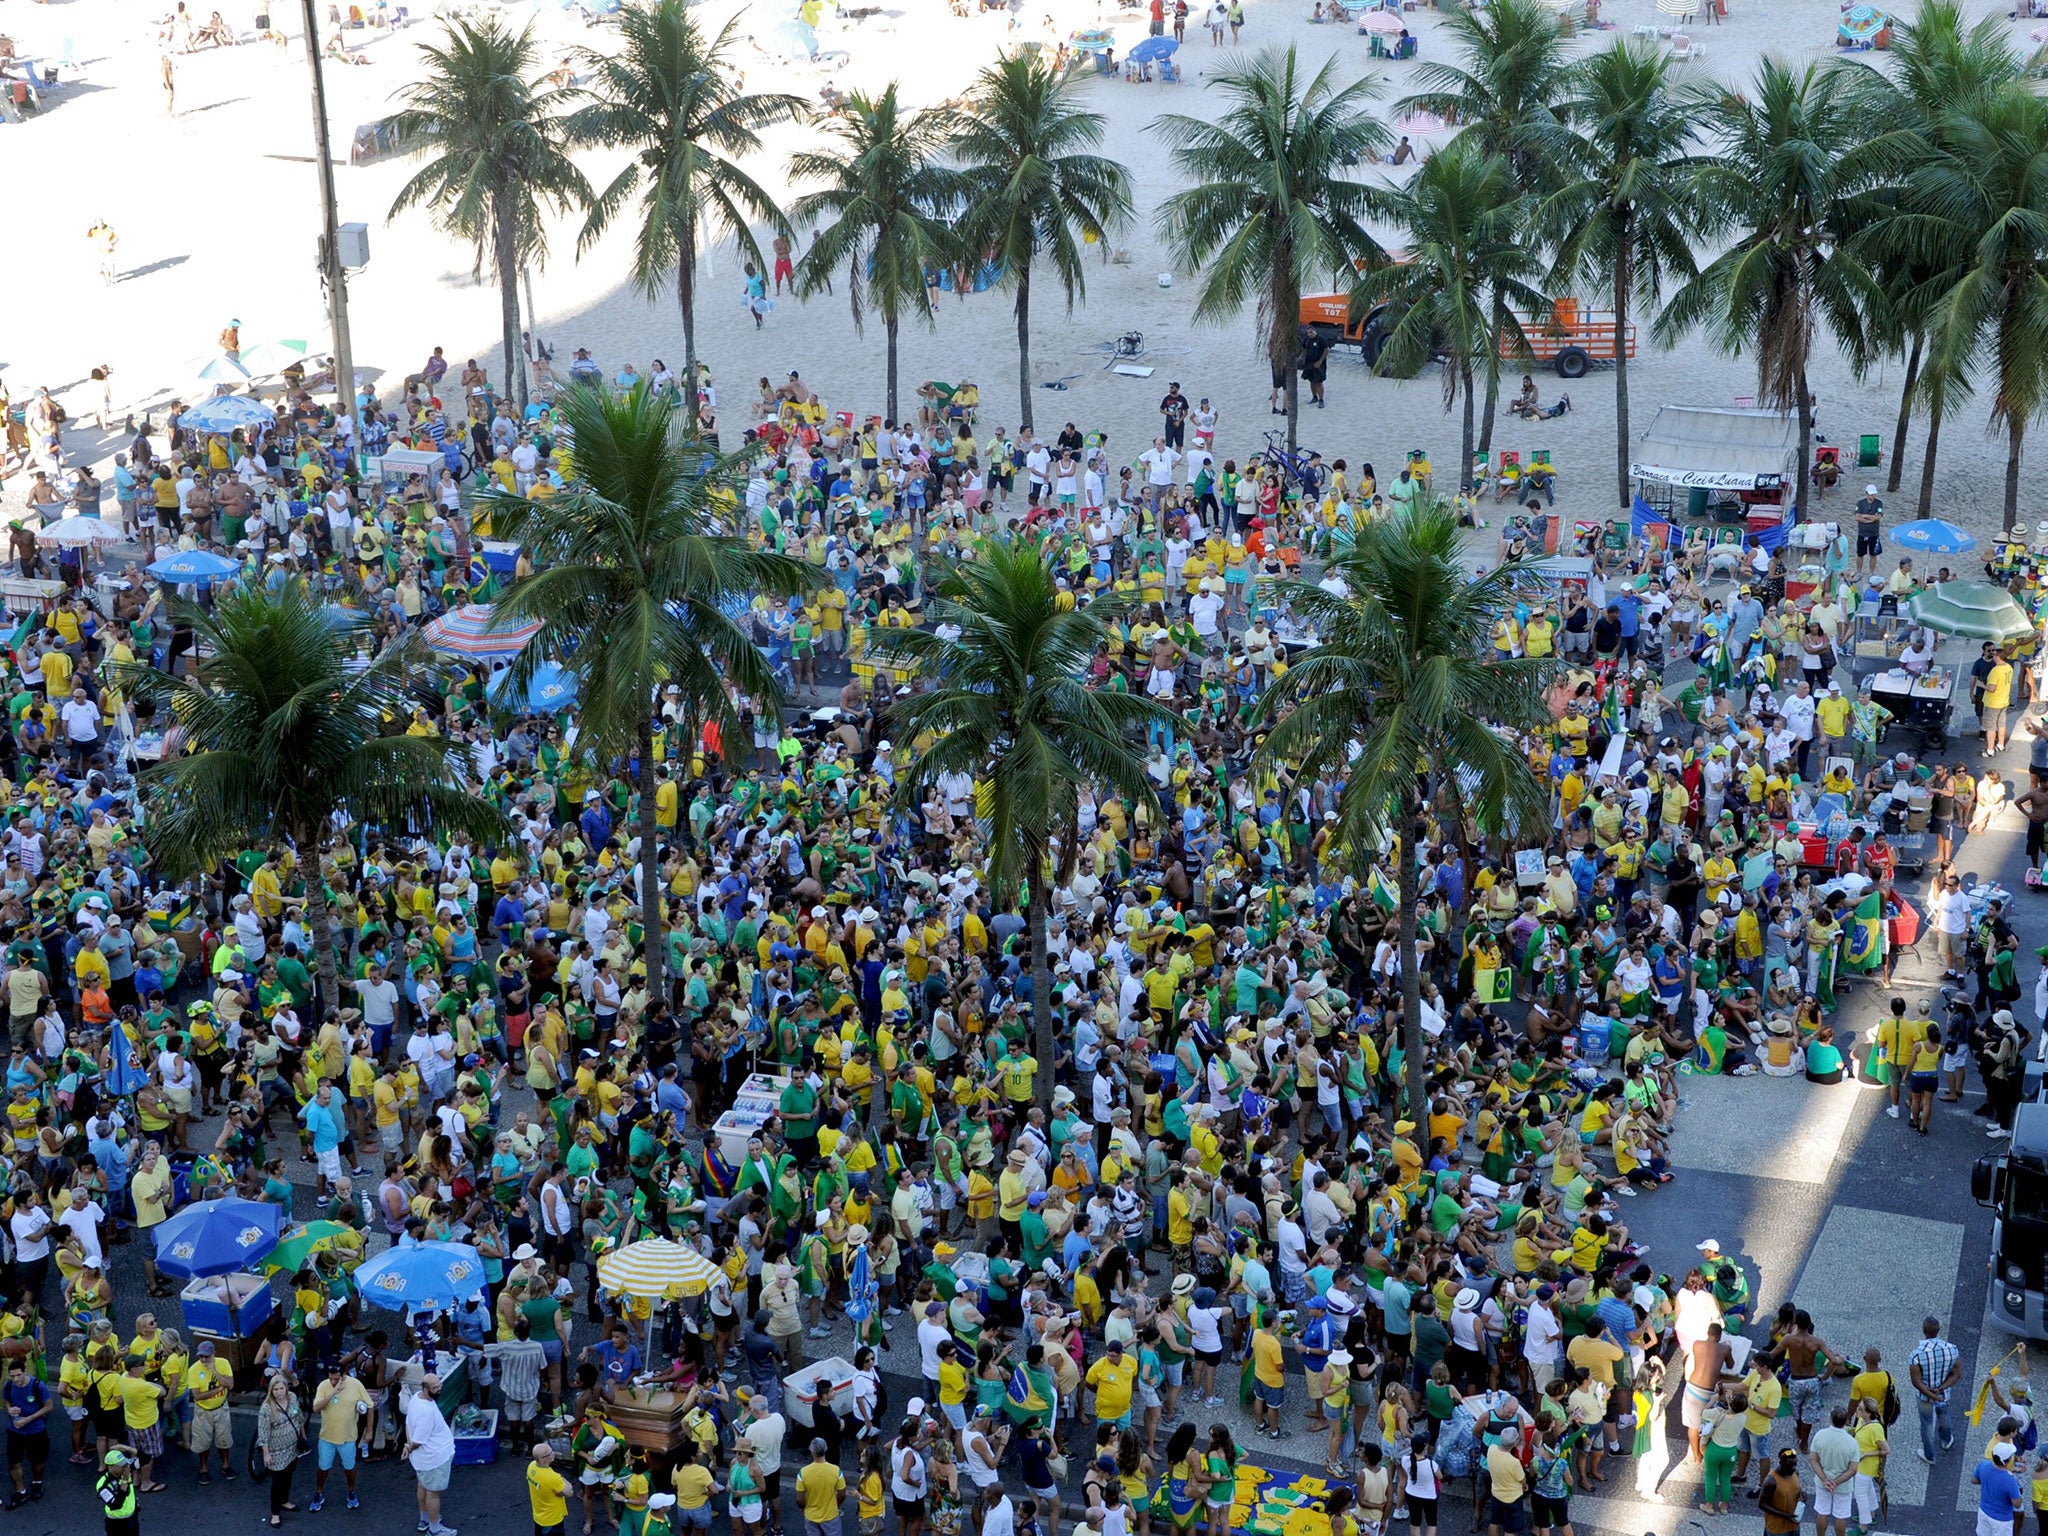 People gather to demonstrate in favor of impeachment of President Dilma Rousseff in Copacabana, Rio de Janeiro, Brazil